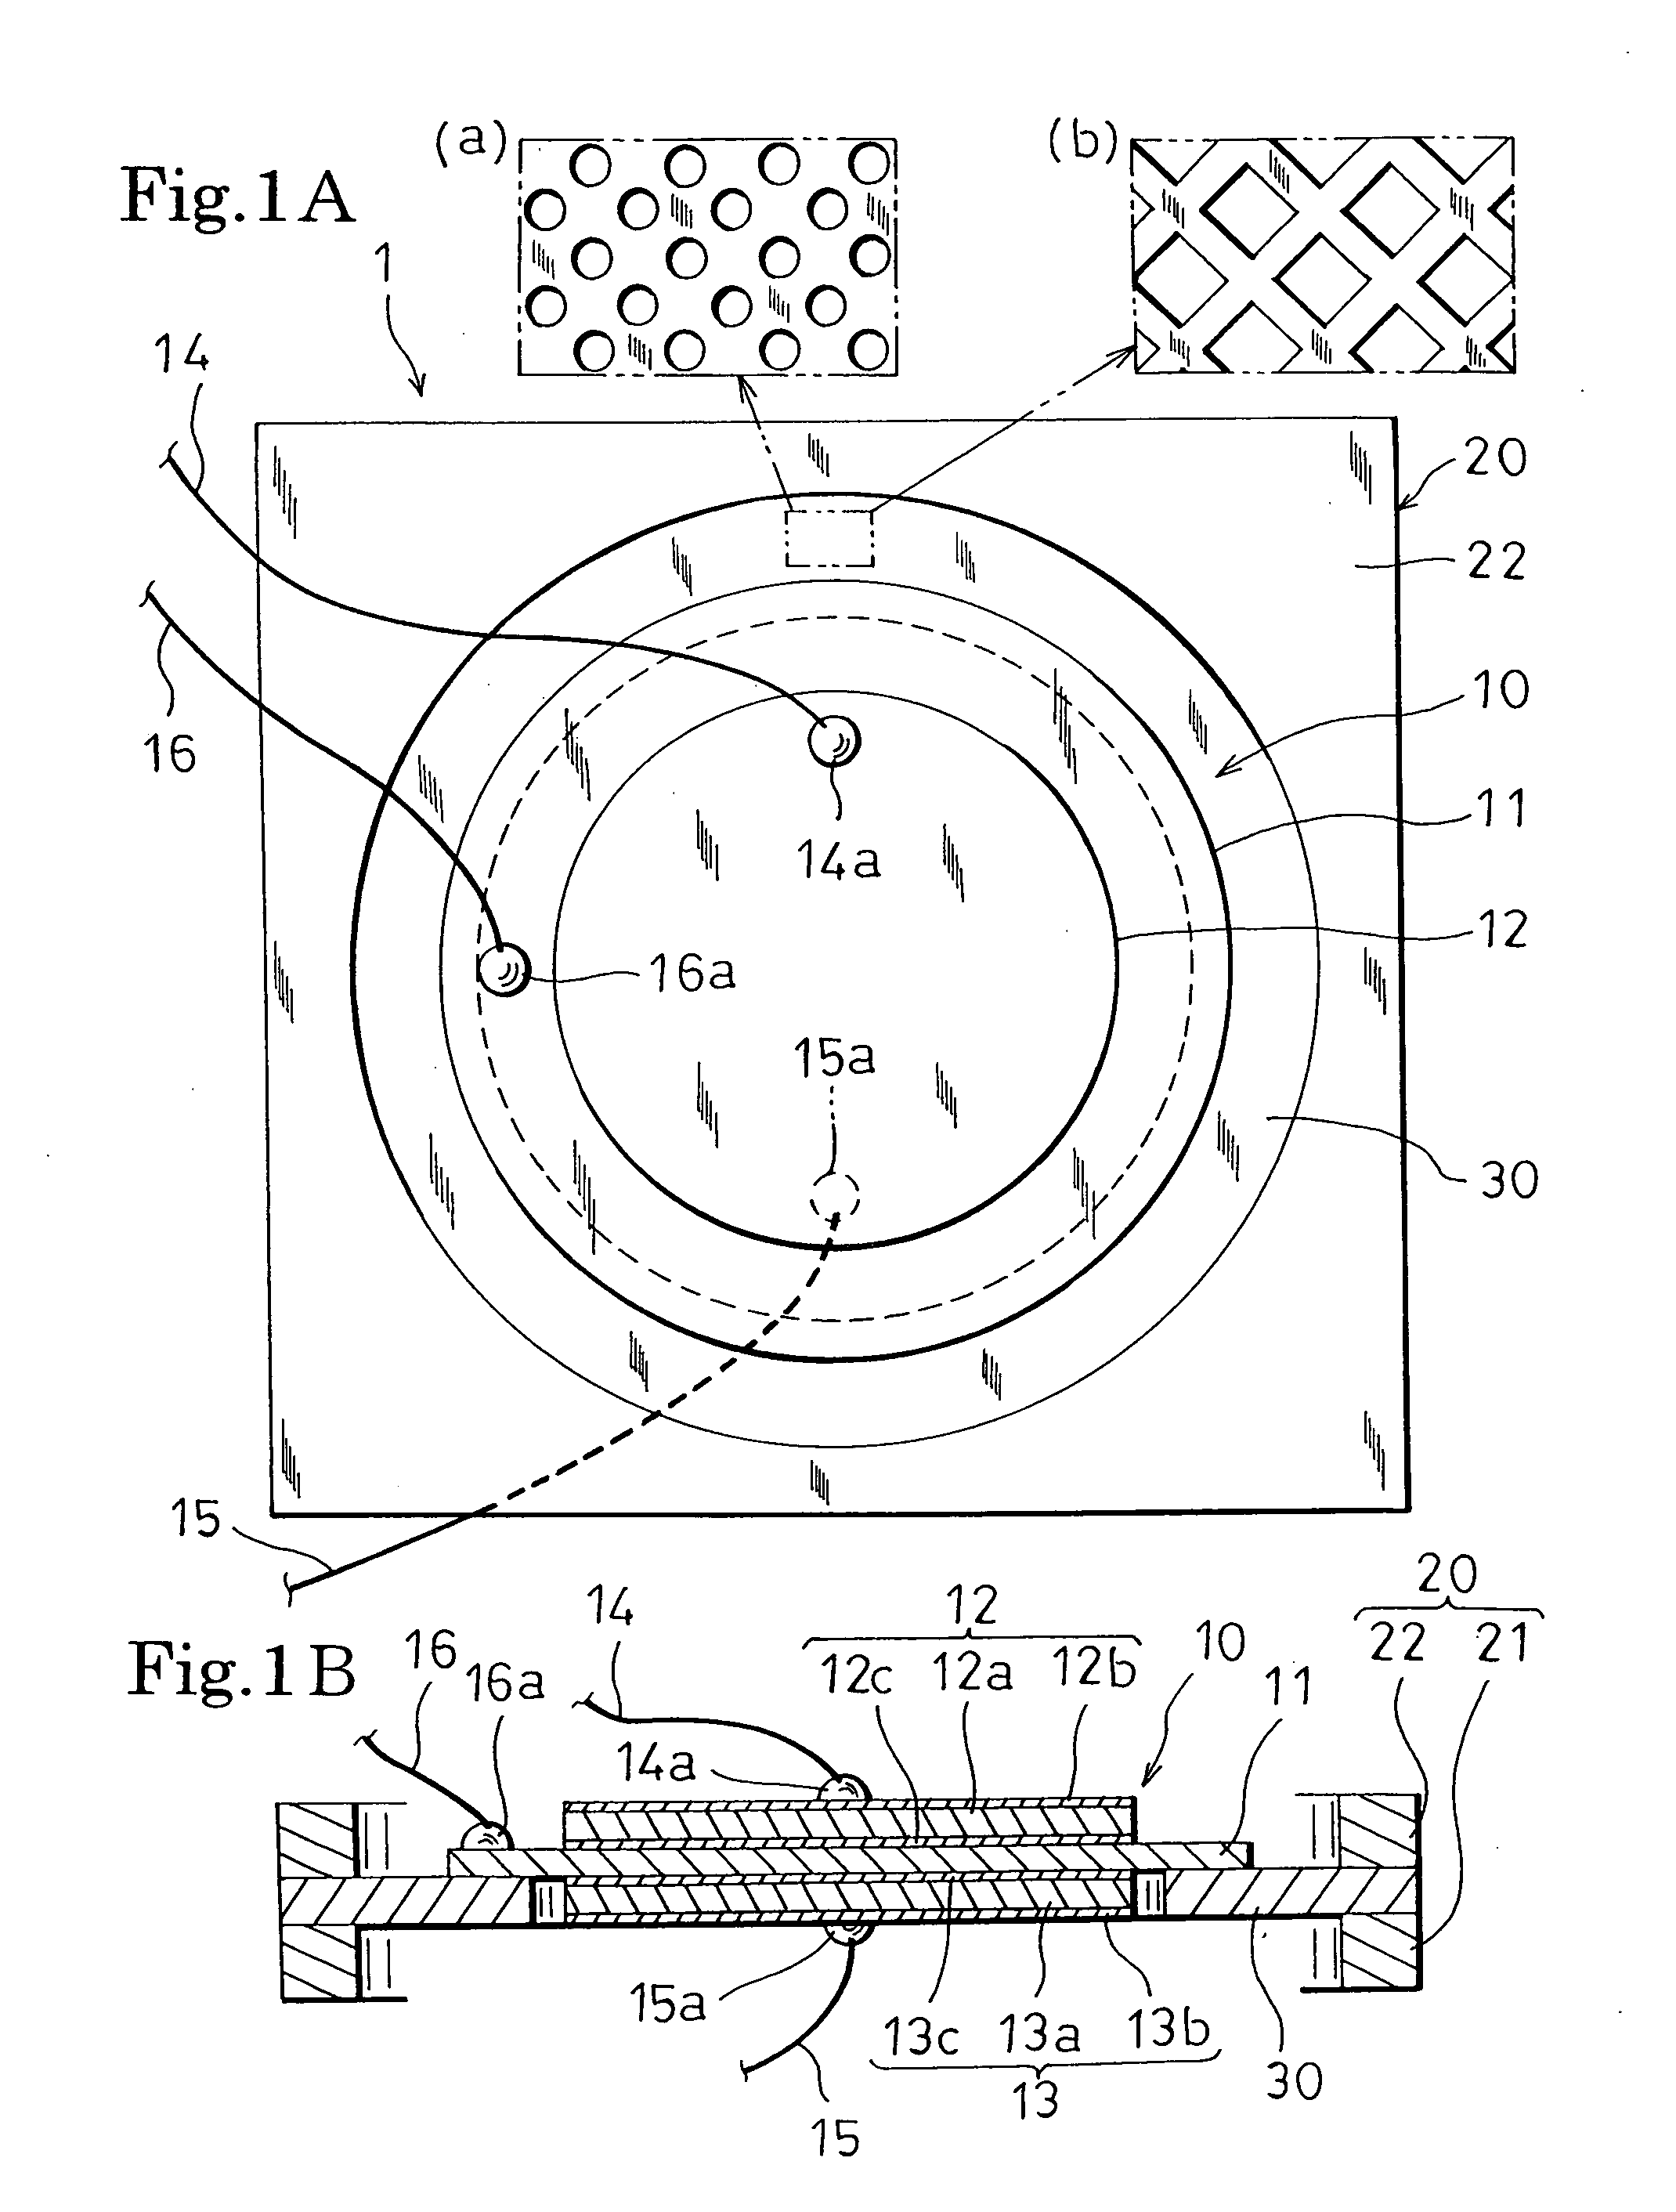 Piezoelectric electroacoustic transducing device